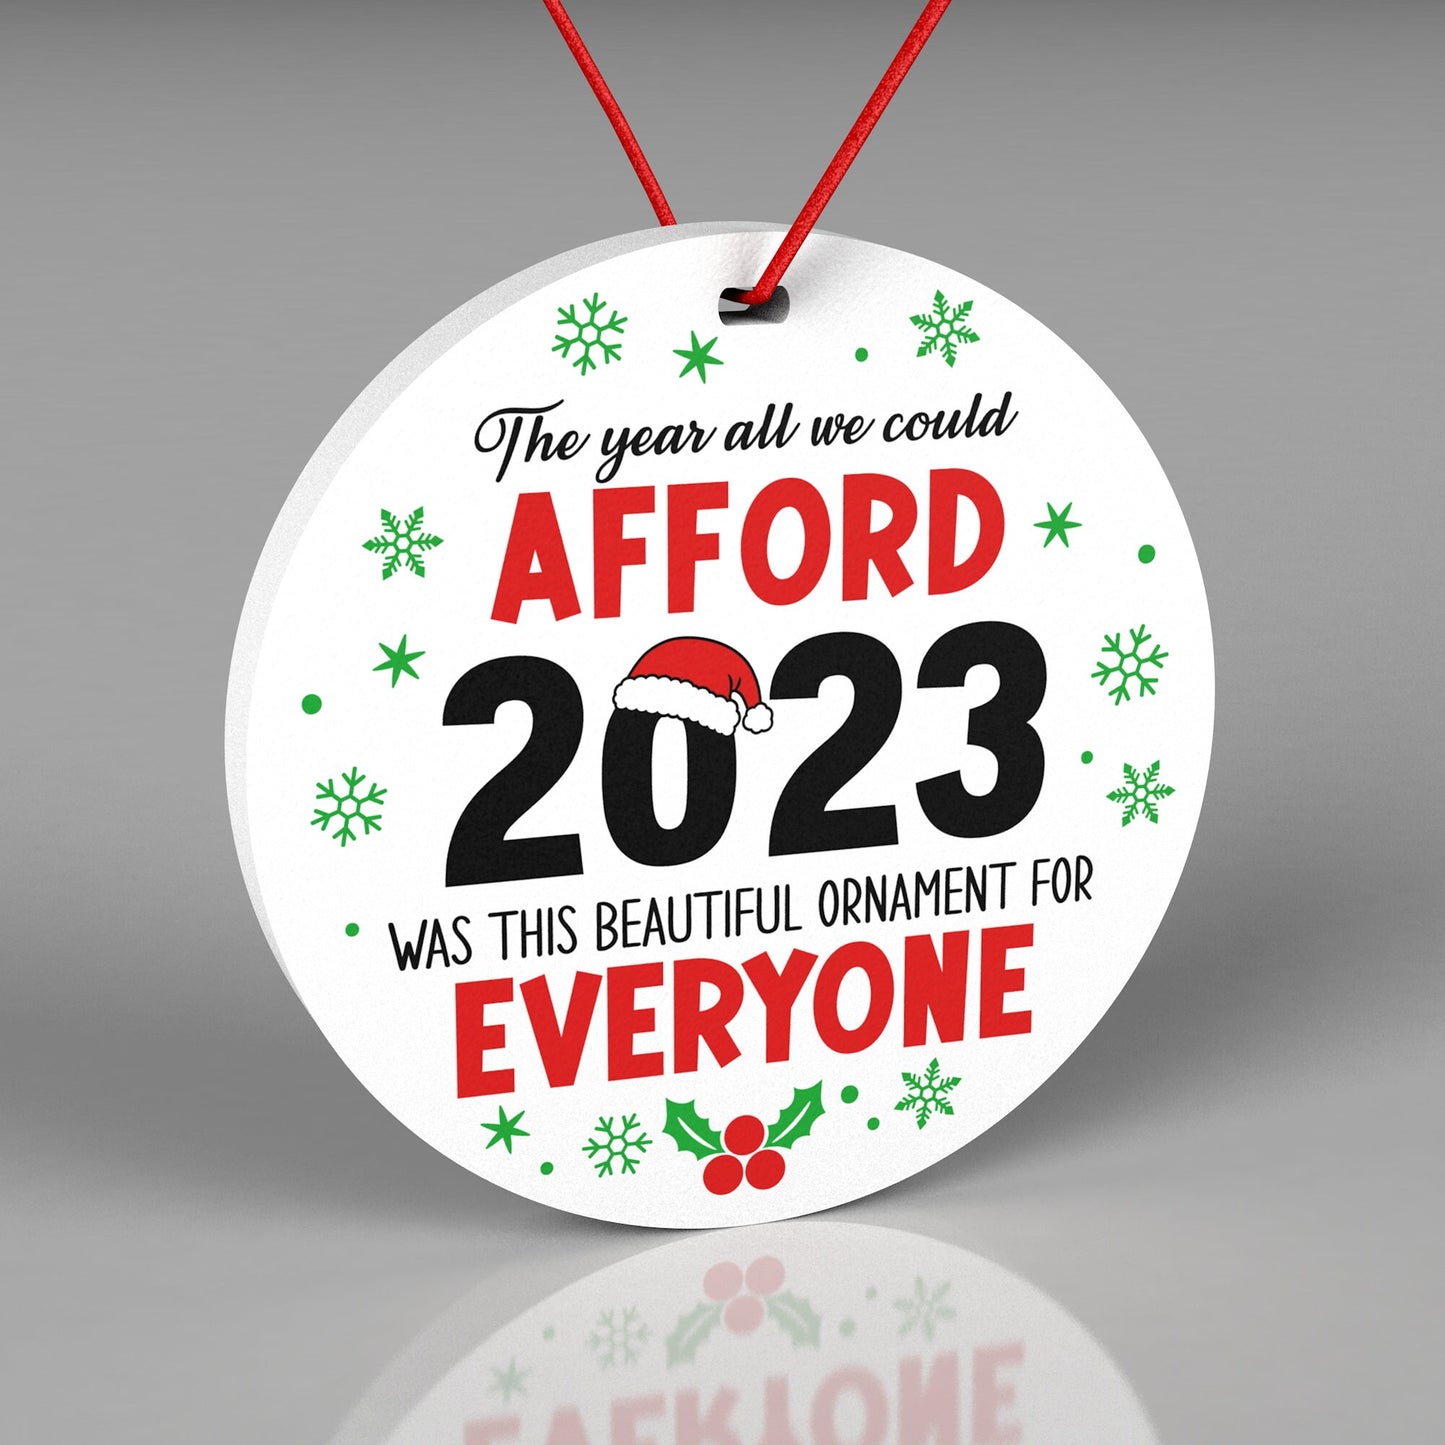 Funny Christmas 2023 Ornament, The Year All We Could Afford Was This Beautiful Ornament for Everyone, Gift Idea for Friends and Family